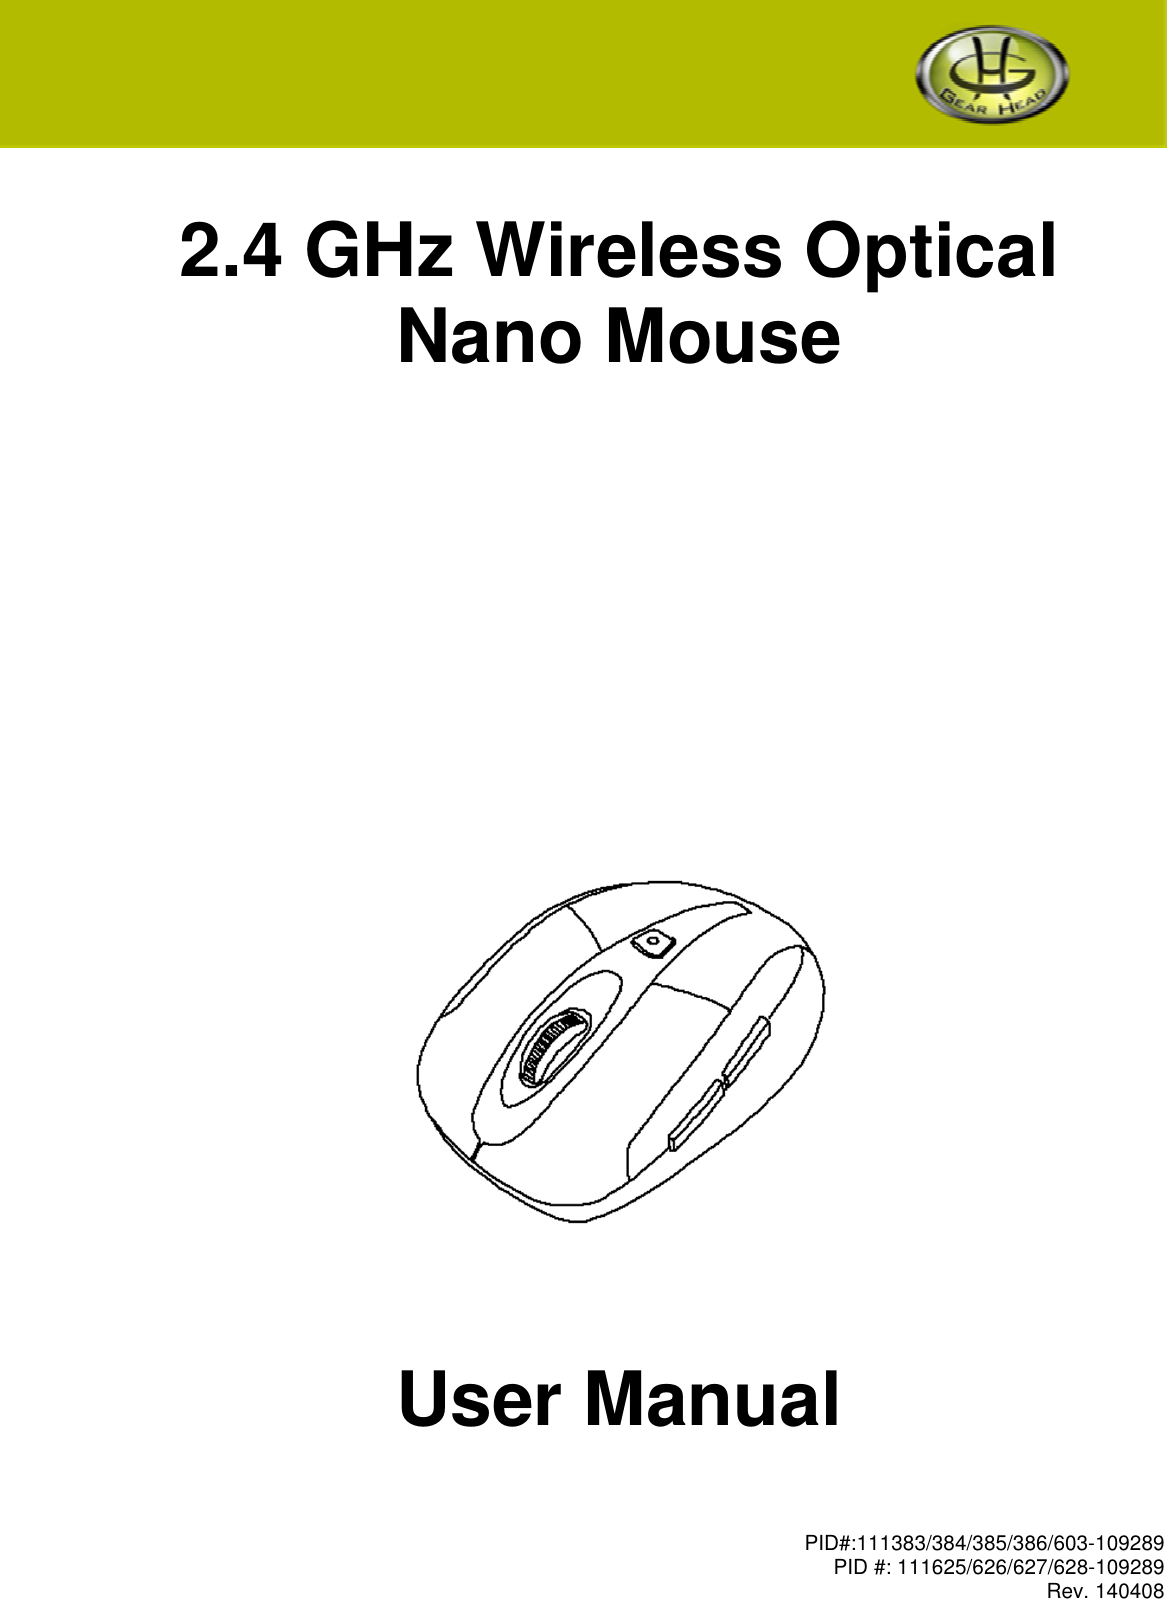 PID#:111383/384/385/386/603-109289  PID #: 111625/626/627/628-109289 Rev. 140408    2.4 GHz Wireless Optical  Nano Mouse                                  User Manual 